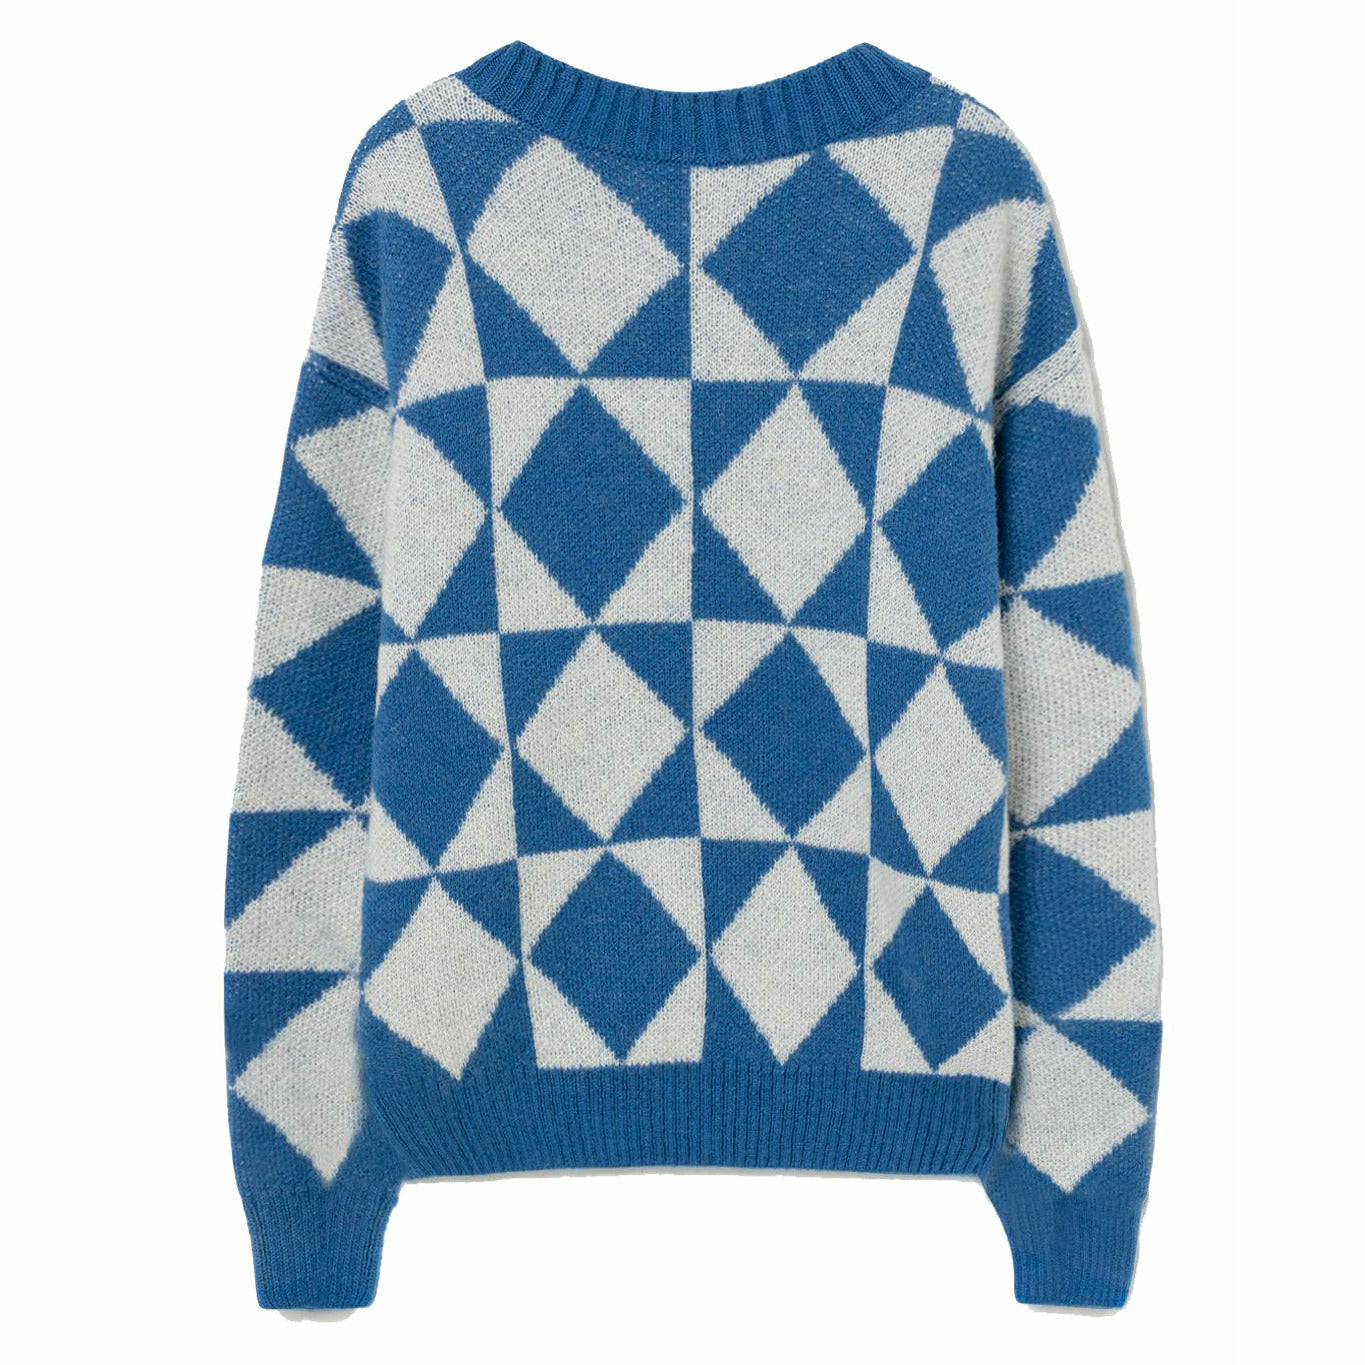 Arty Bull Kids Sweater - Bicolor The Animals Observatory